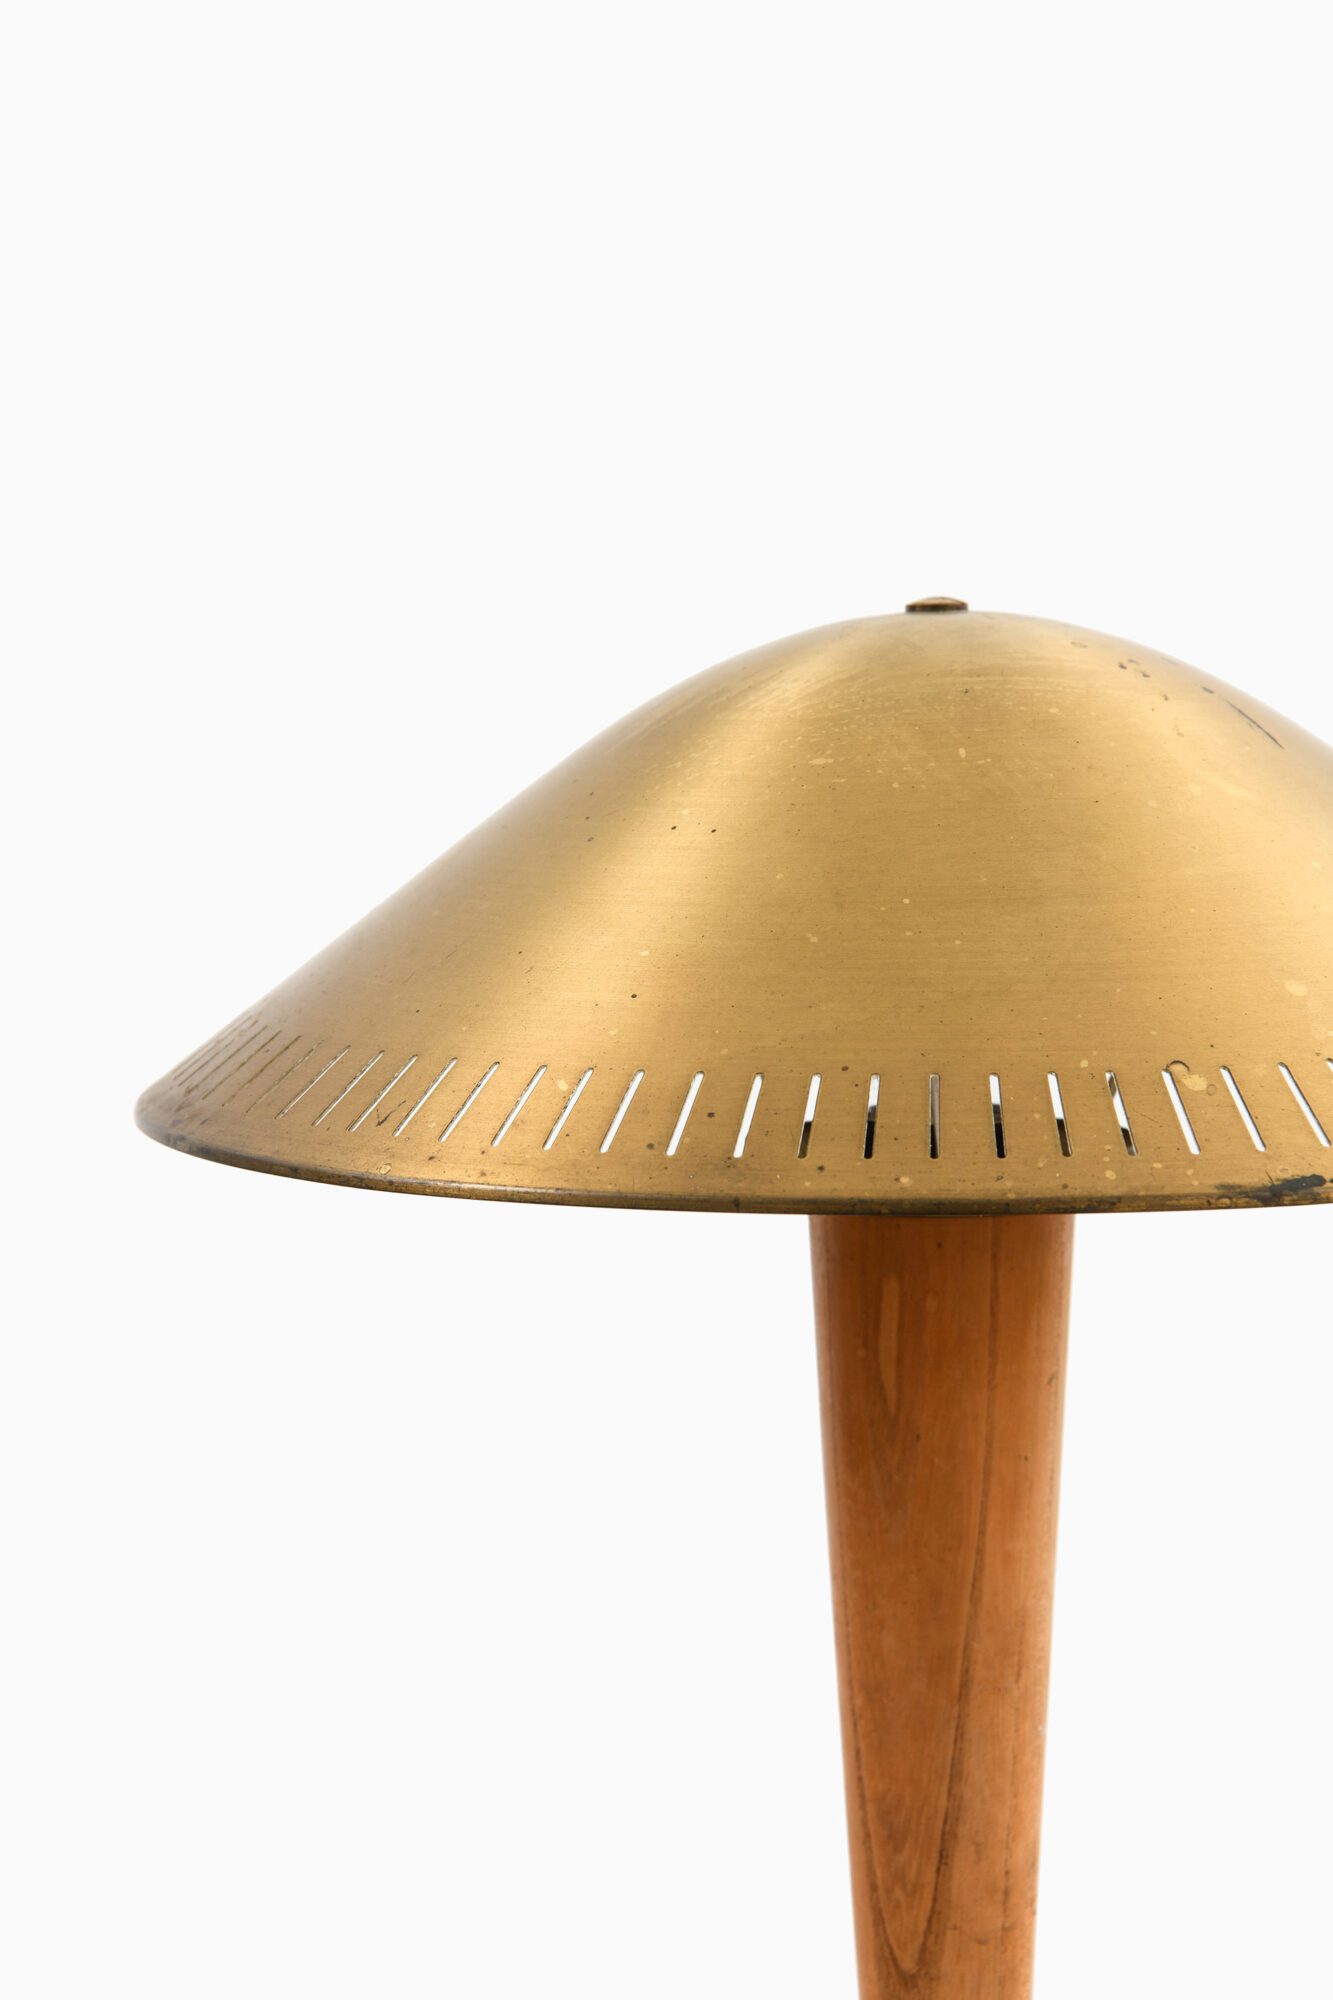 Hans Bergström attributed table lamp by ASEA at Studio Schalling